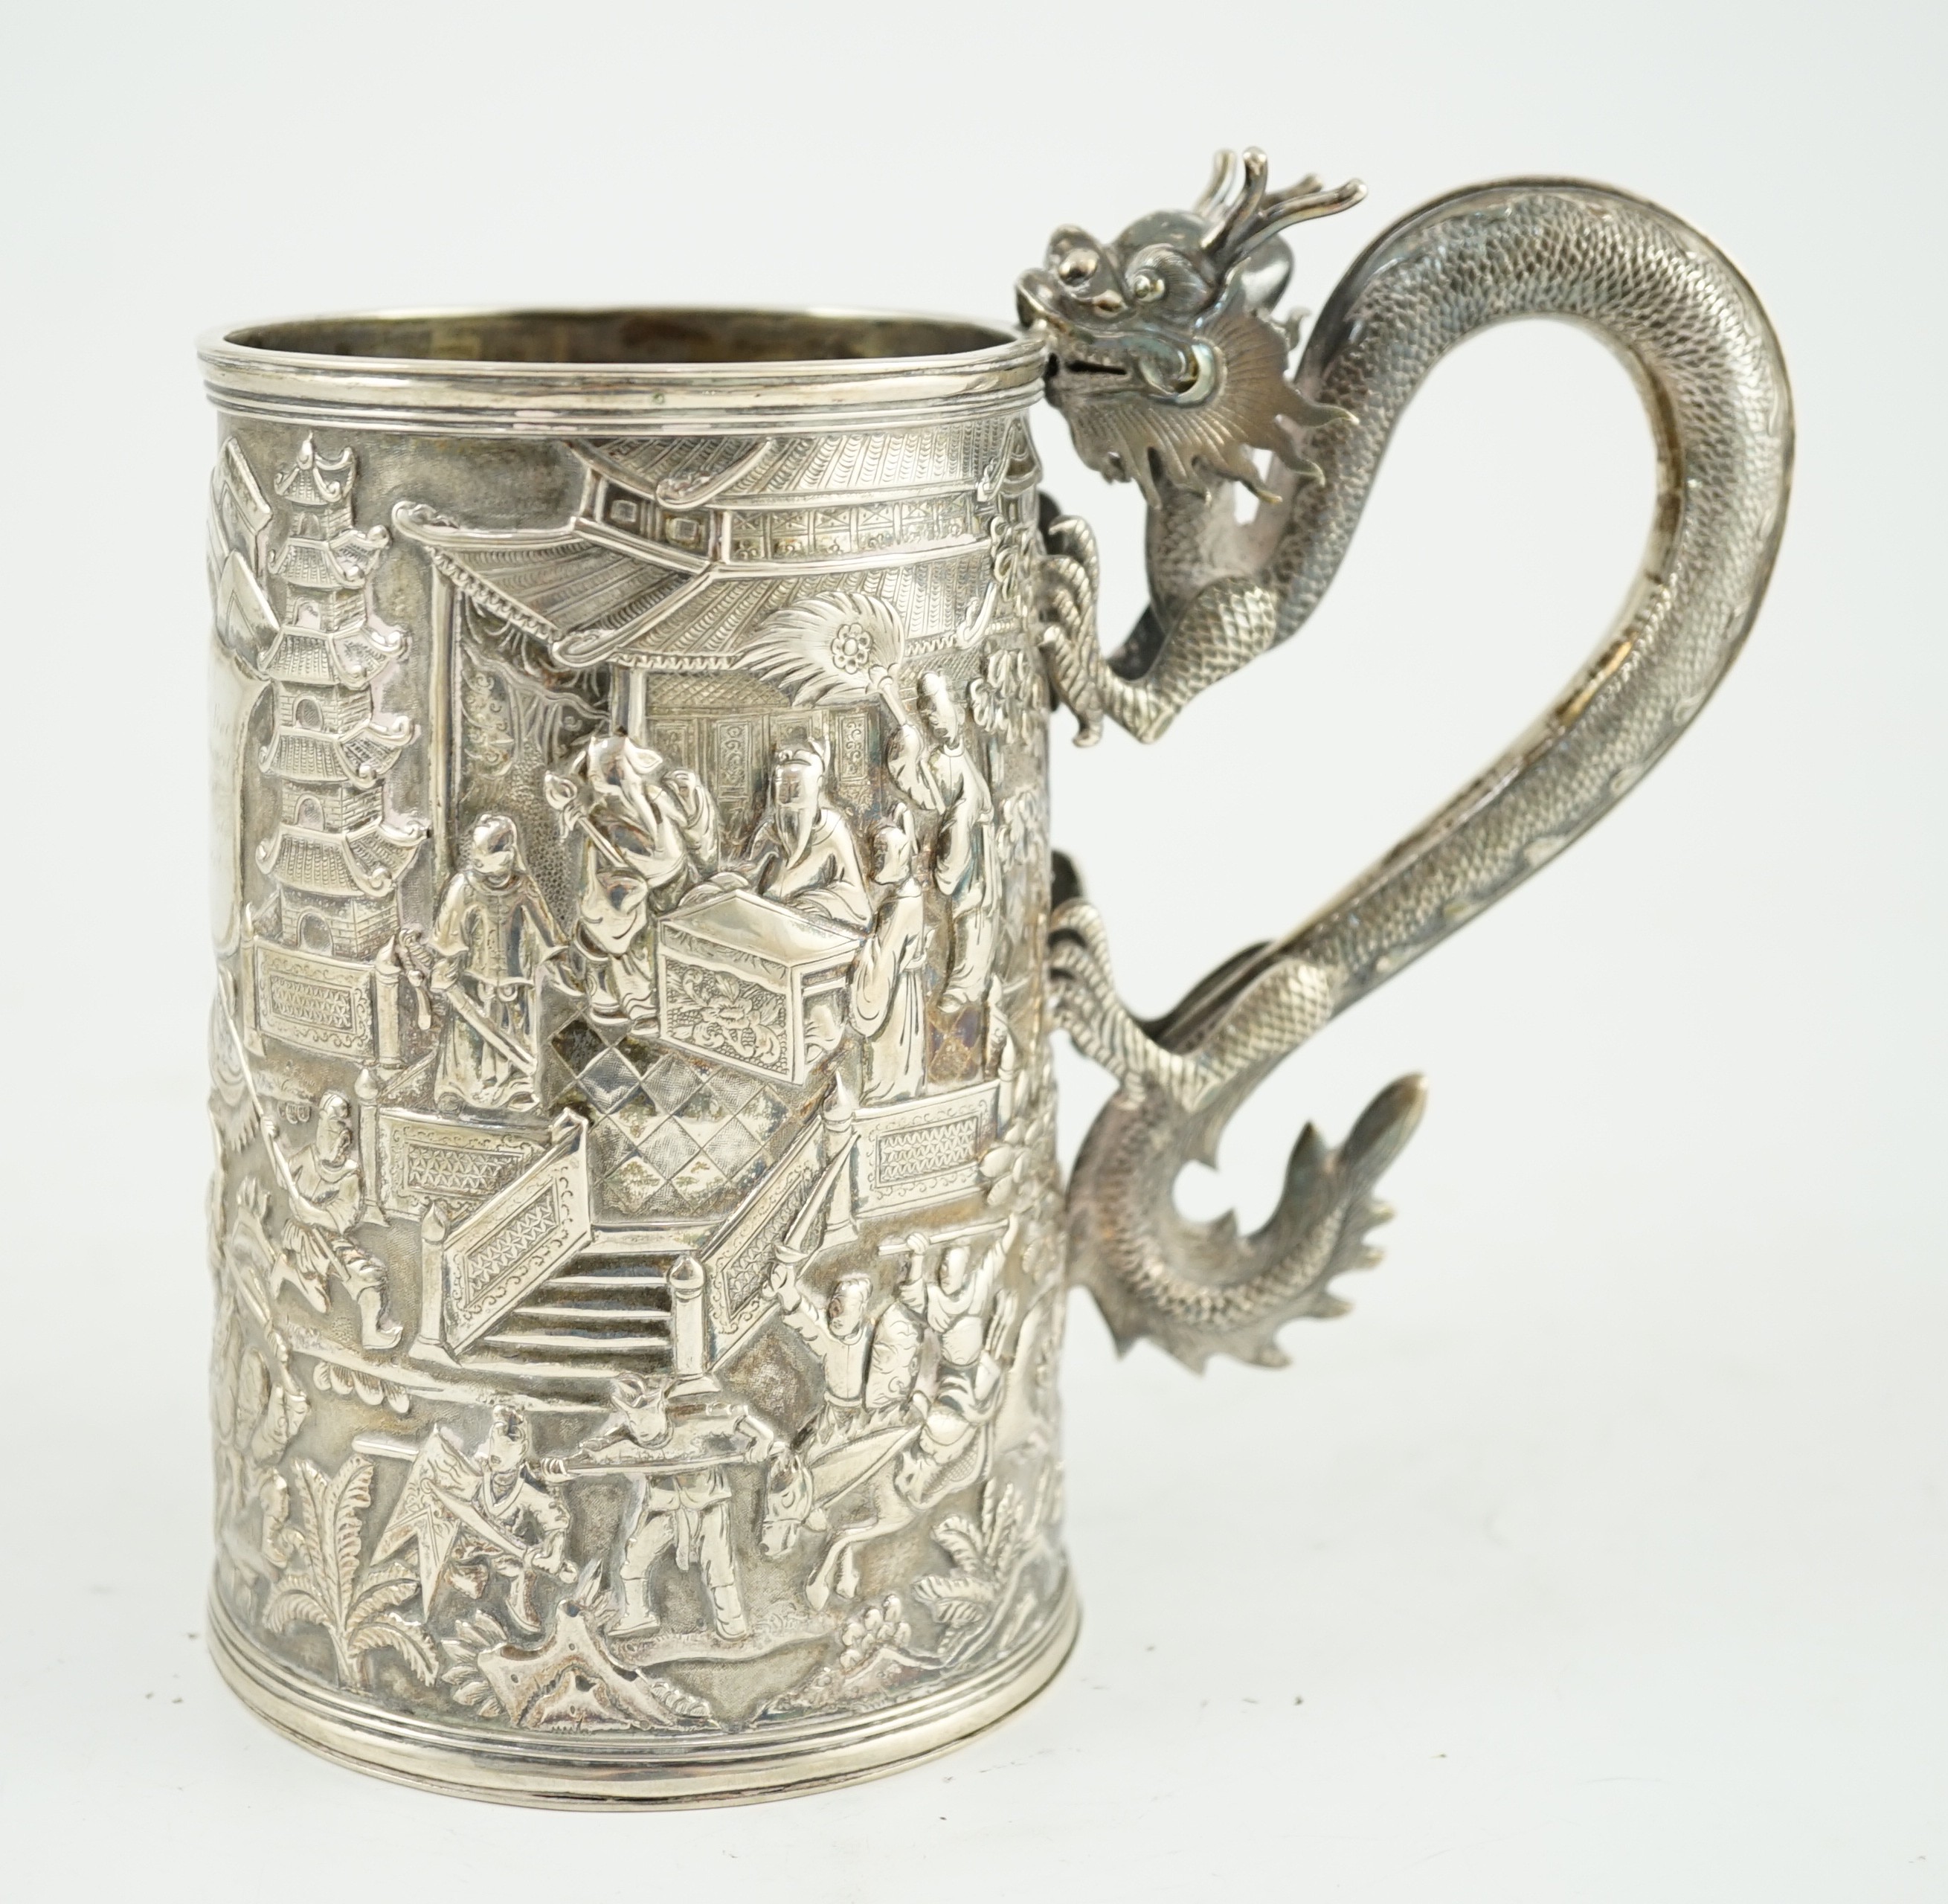 A late 19th century Chinese Export double skinned silver mug, by Leeching